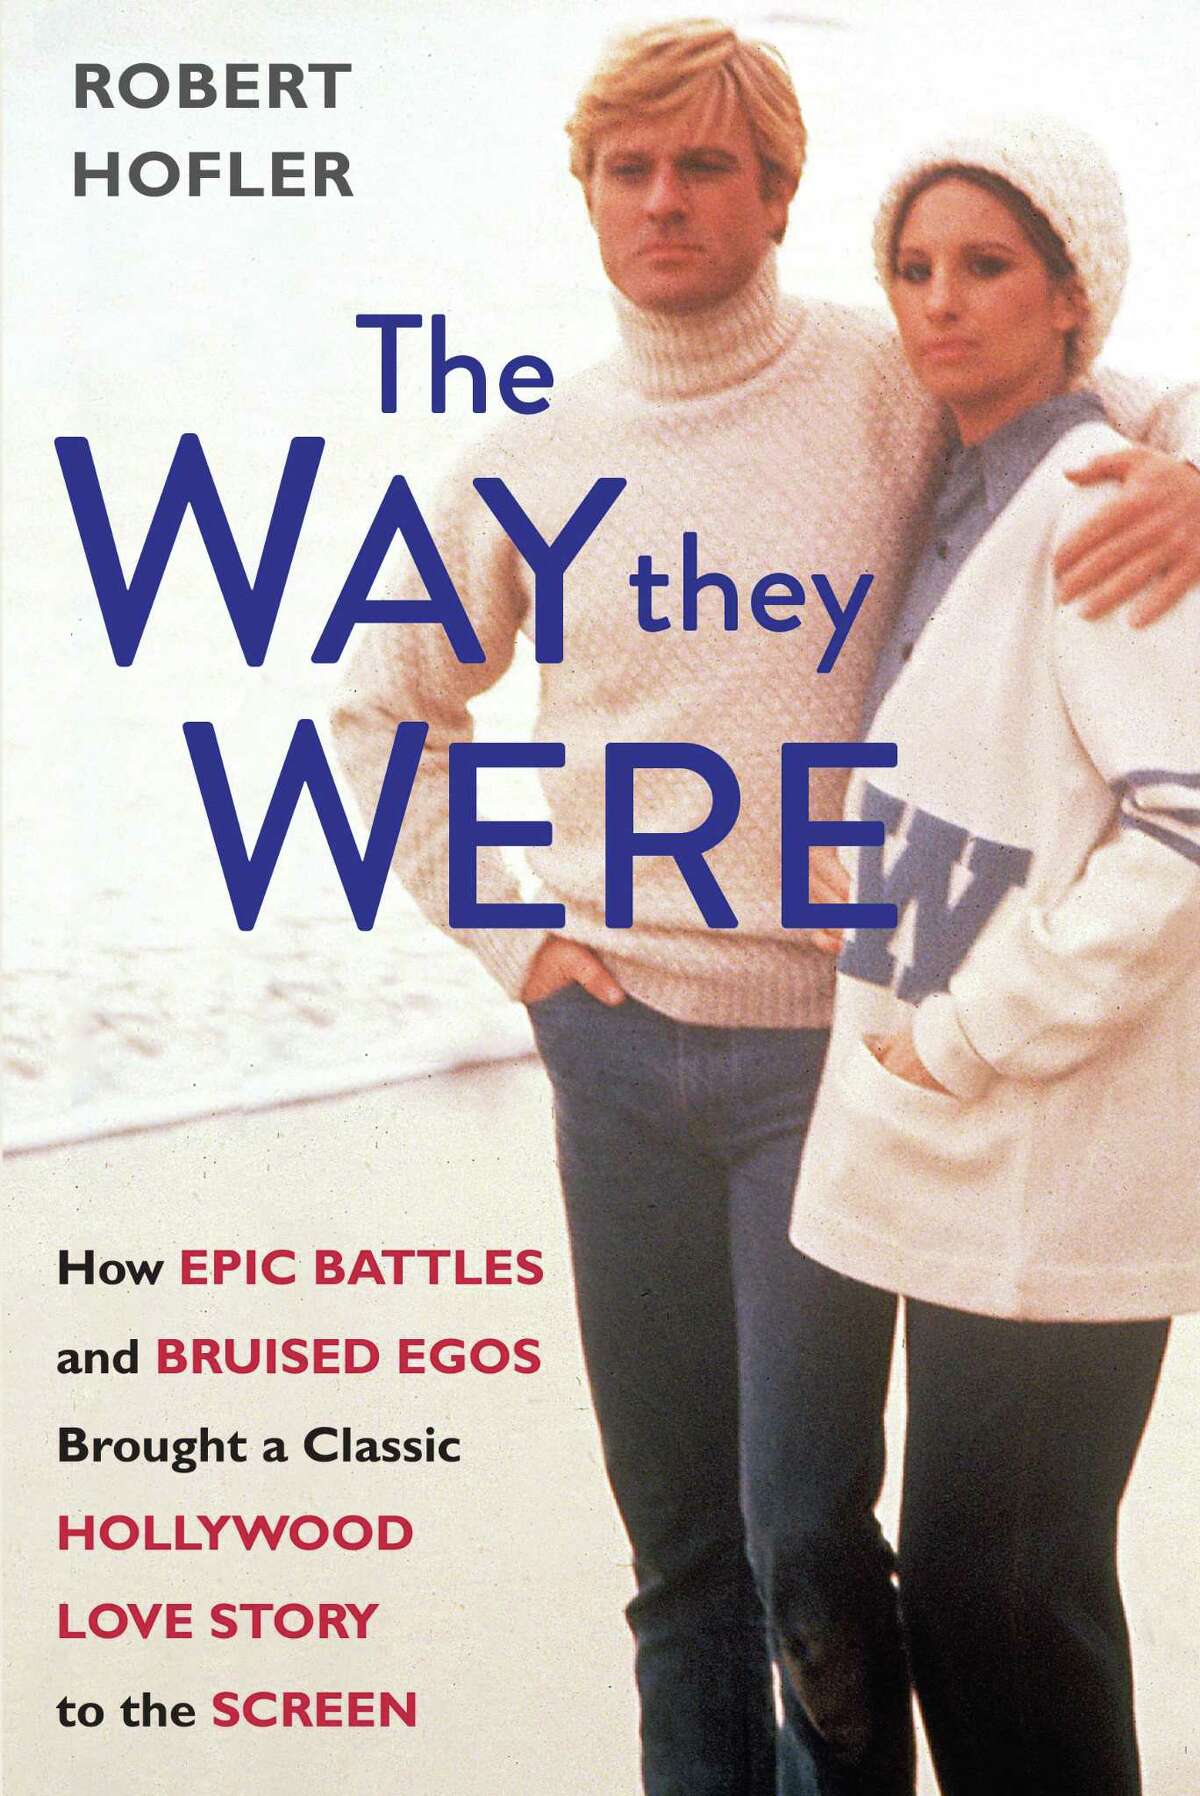 "The Way They Were: How Epic Battles and Bruised Egos Brought a Classic Hollywood Love Story to the Screen" by Robert Hofler